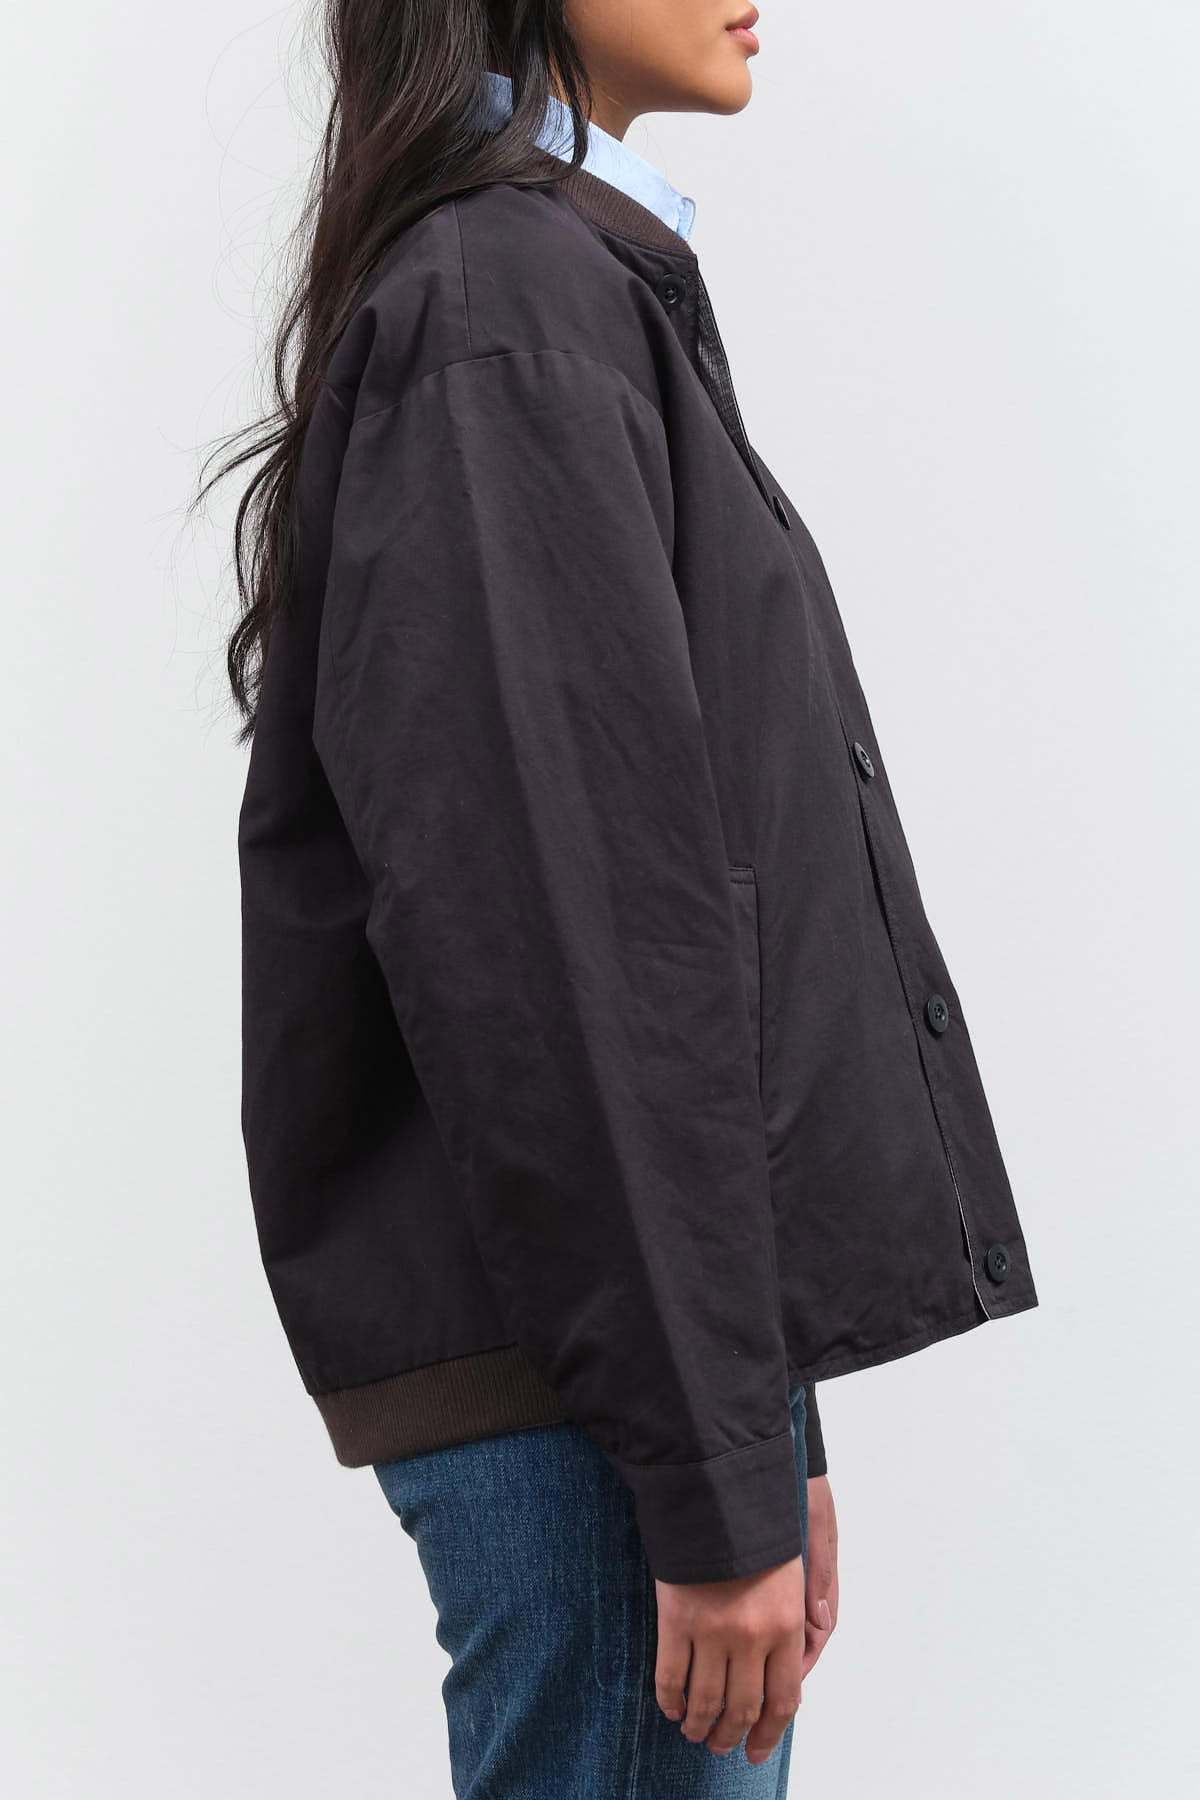 Side view of Unisex Reversible Driving Jacket